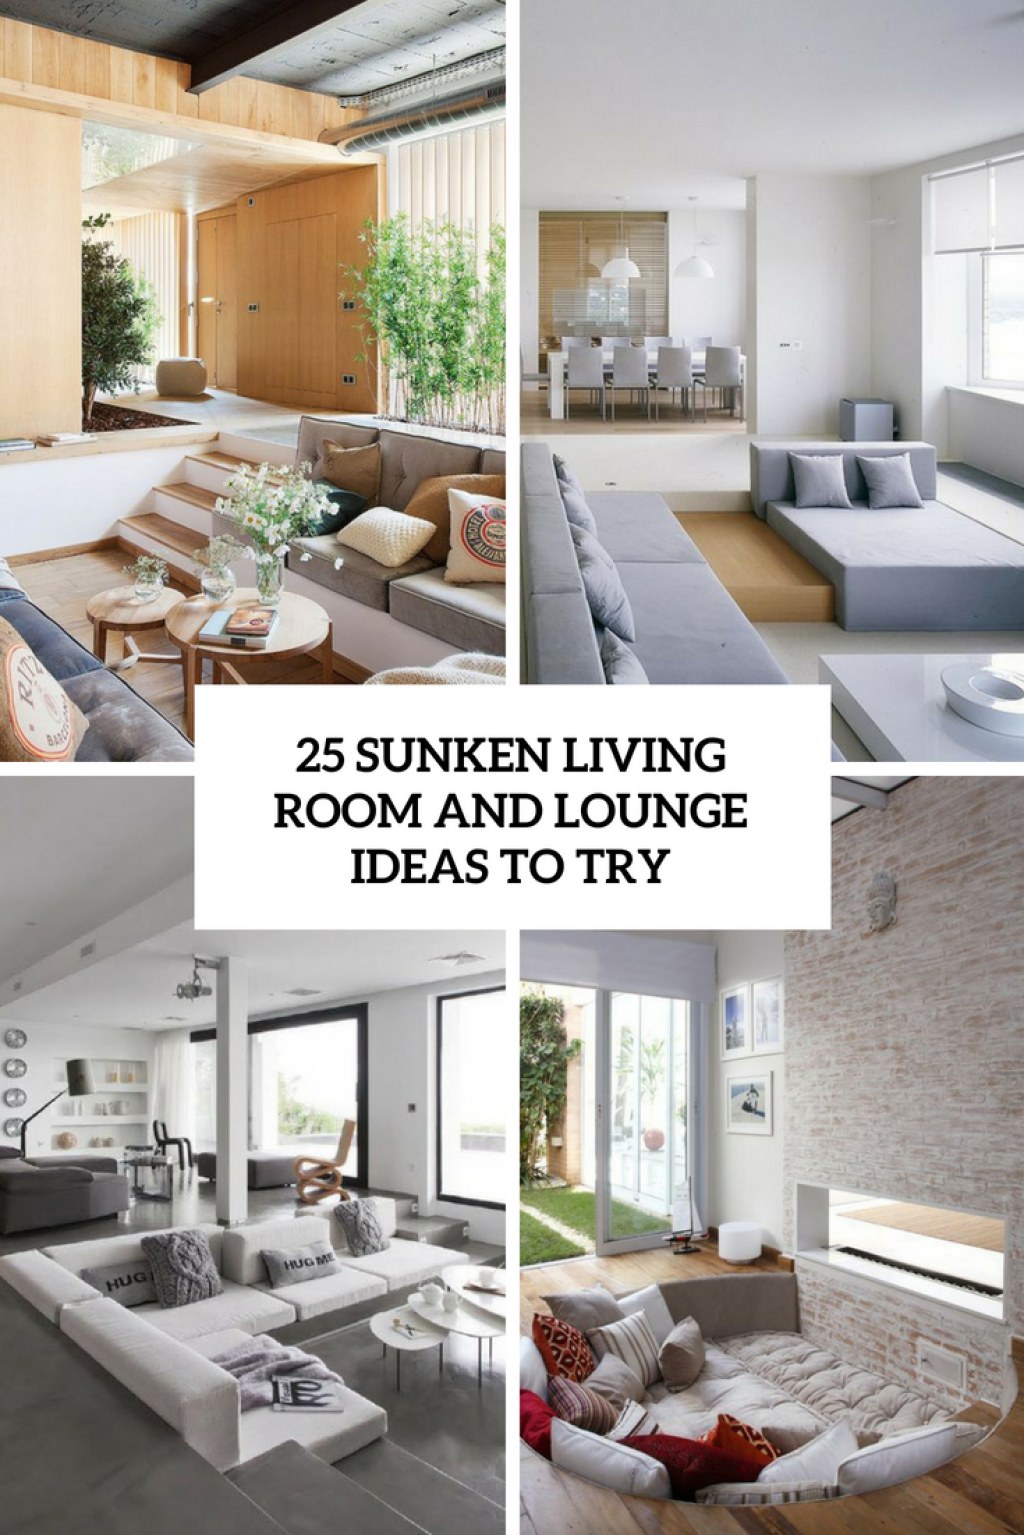 interior design ideas sunken living room - Sunken Living Room And Lounge Ideas To Try - DigsDigs